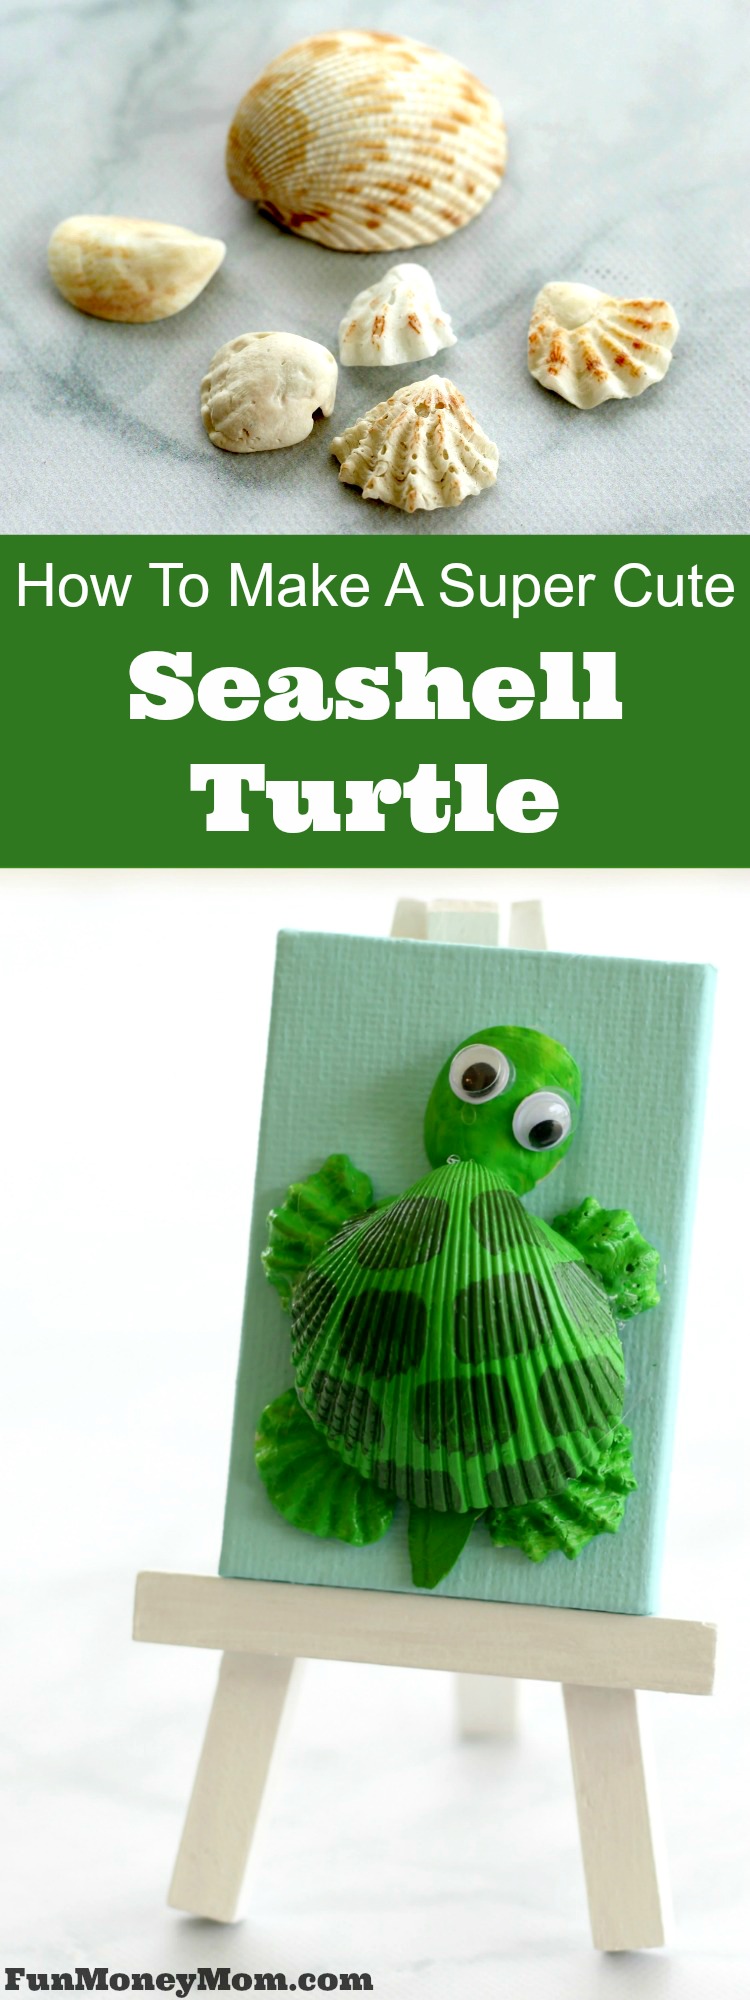 Want a cute summer craft that'll keep the kids entertained? Grab some seashells, paint and glue and make this adorable seashell turtle craft. It's fun for kids but fun for mommy too!